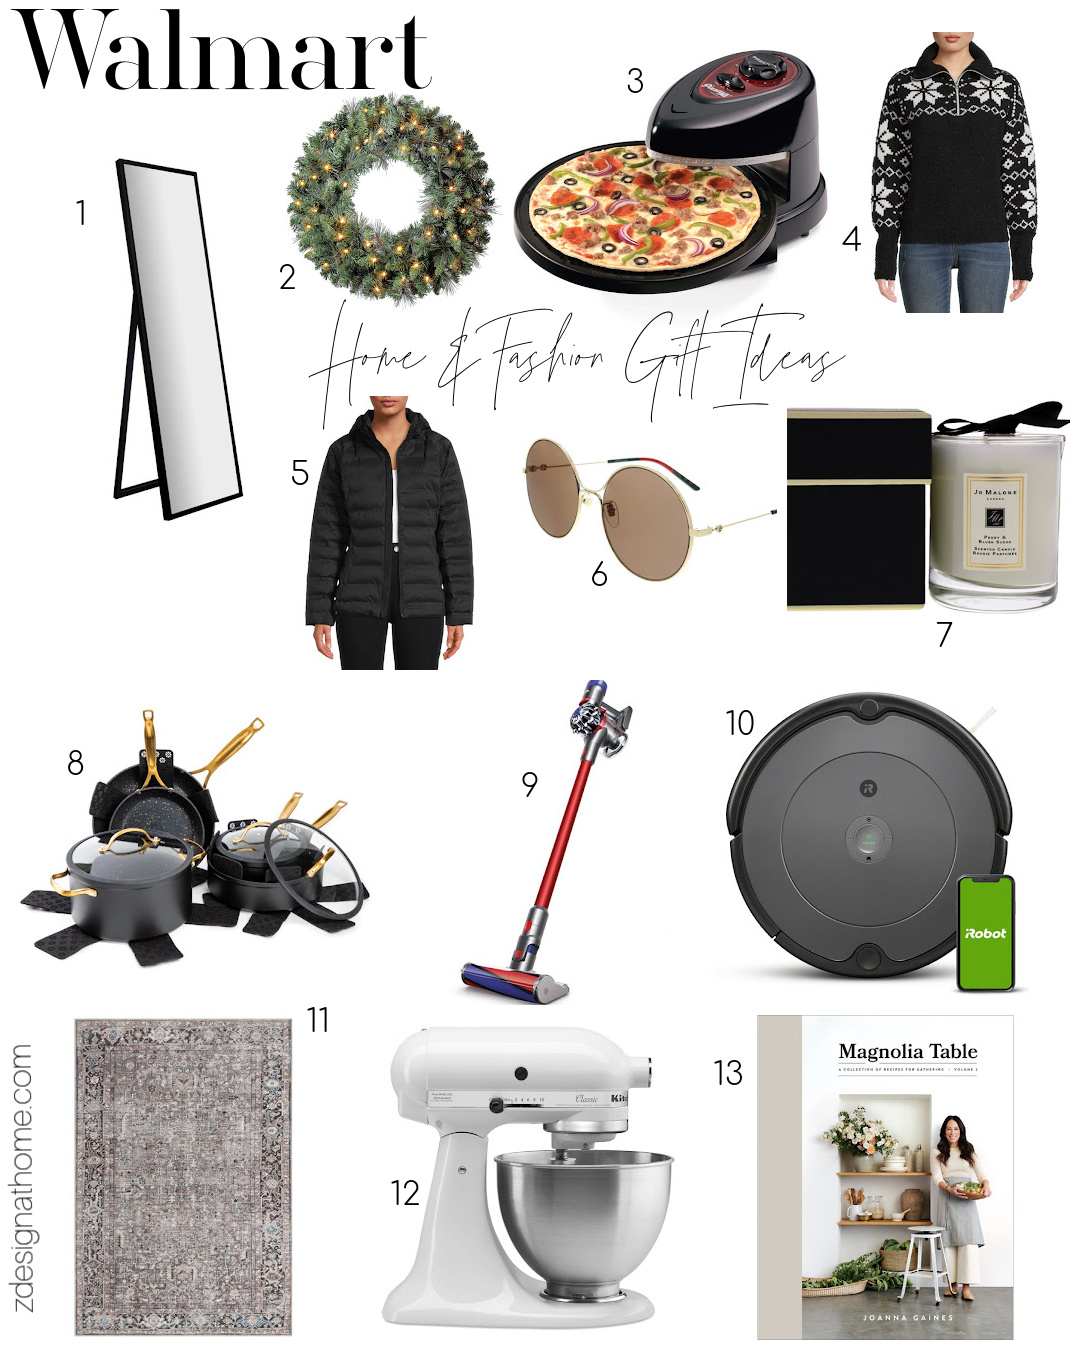 Walmart Gift Finder for Him, Her and anyone - best gifts at walmart this year 